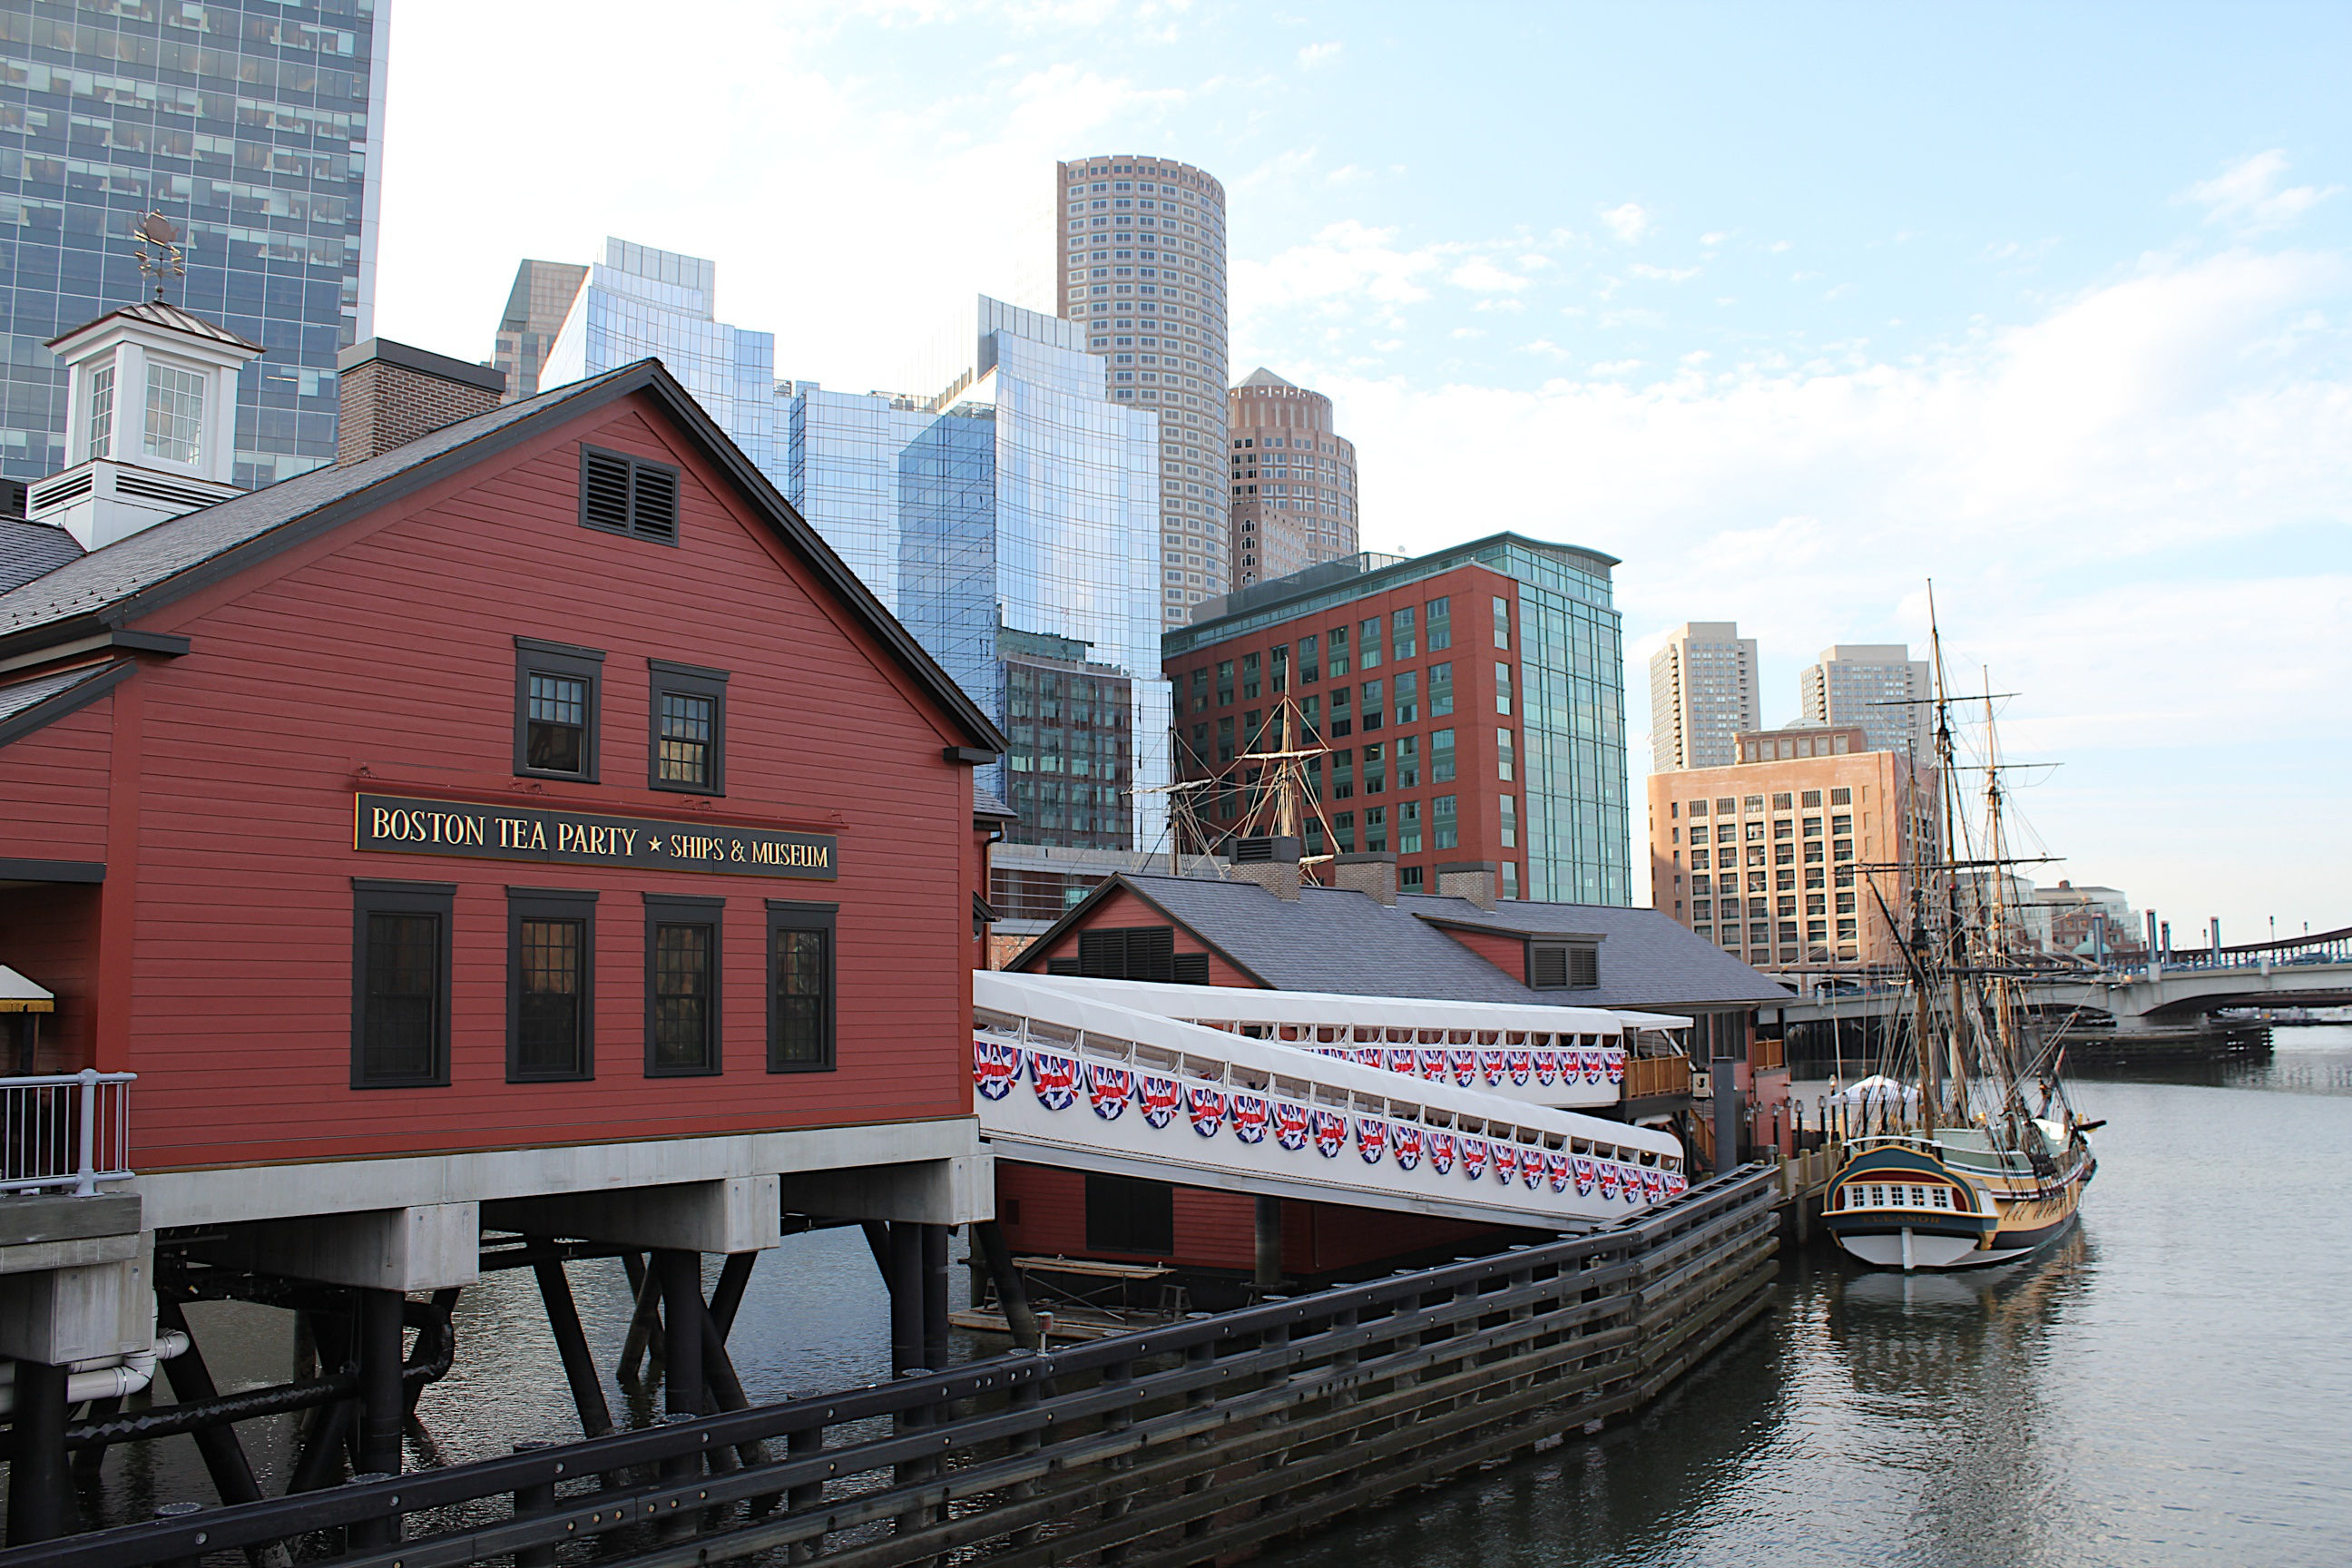 Site of the Boston Tea Party. Image by Kristina D.C. Hoeppner / CC BY-SA 2.0